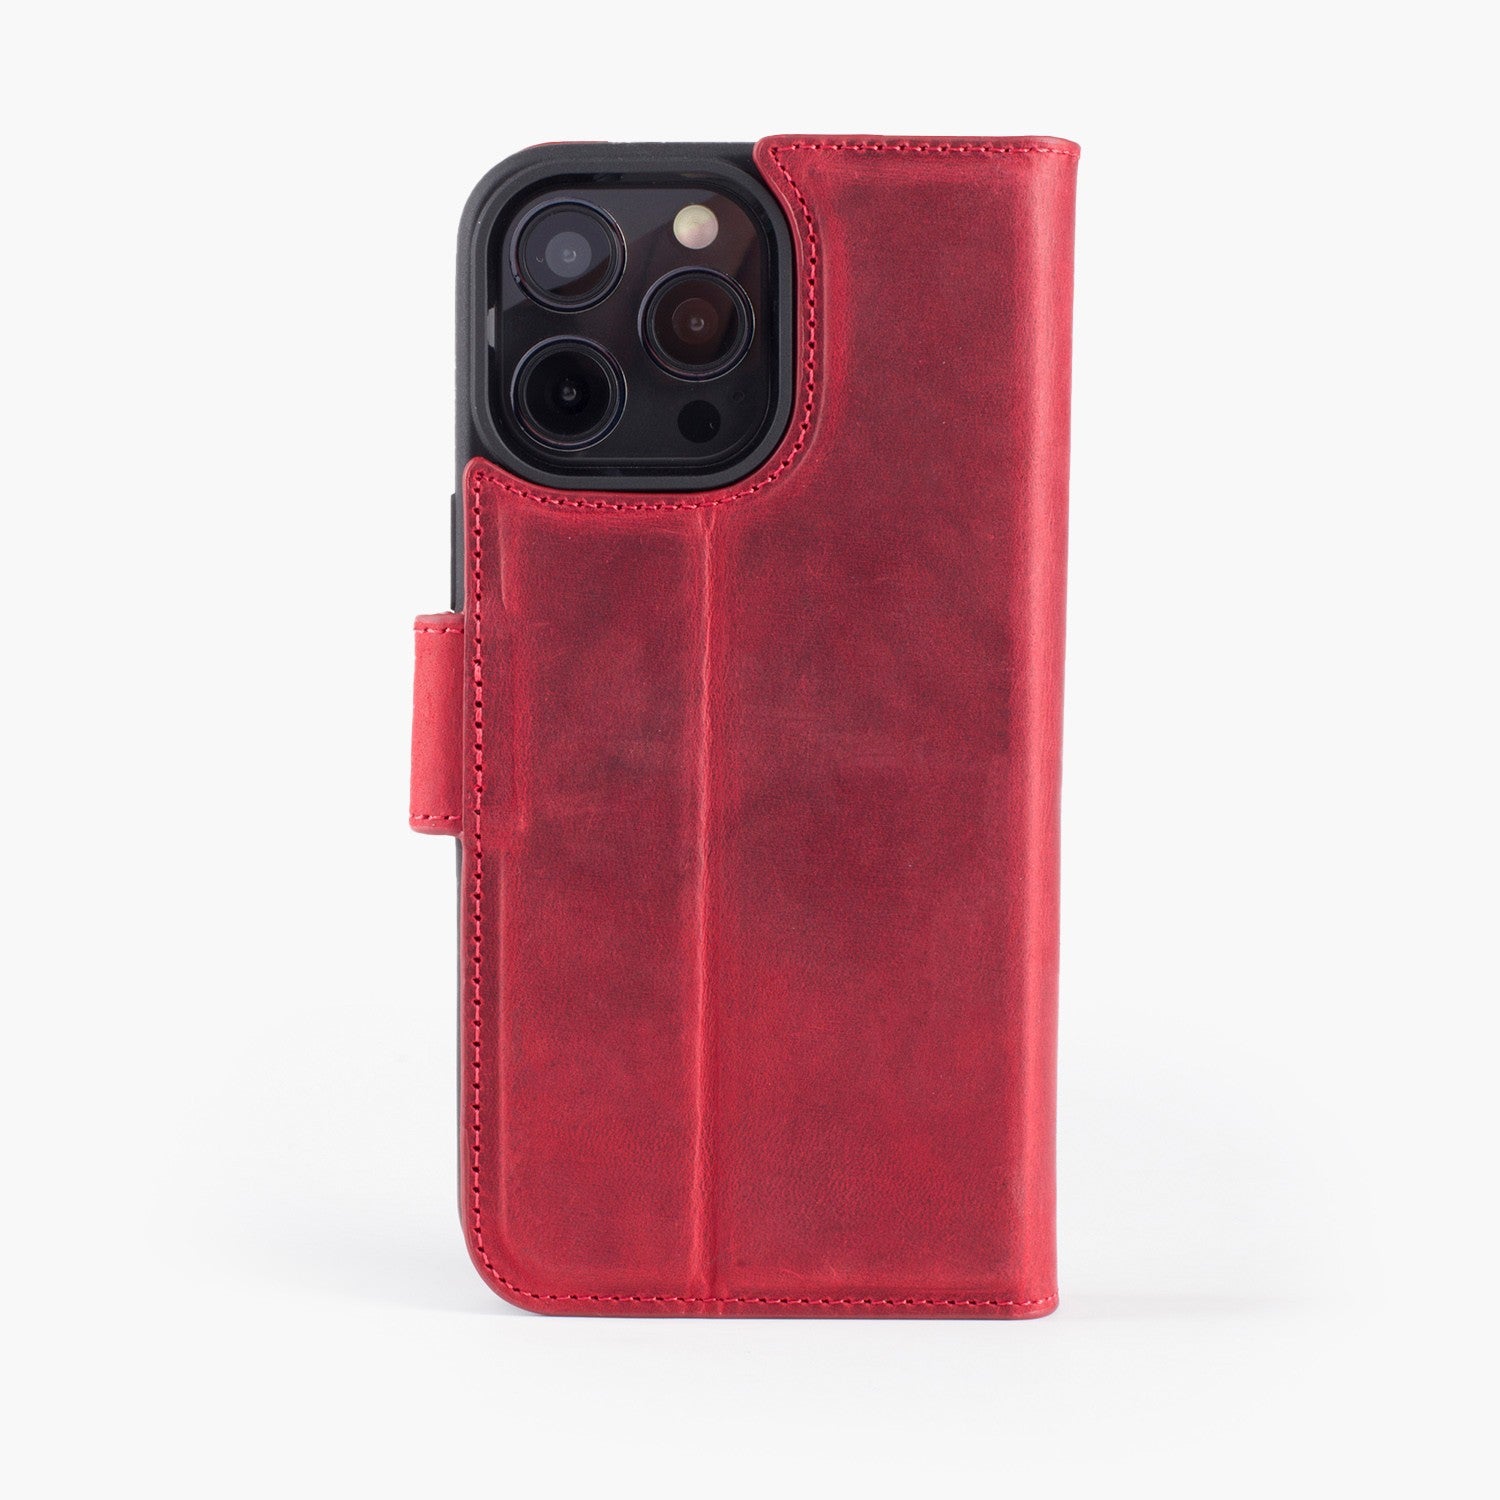 Wachikopa leather Magic Book Case 2 in 1 for iPhone 11 Pro Red